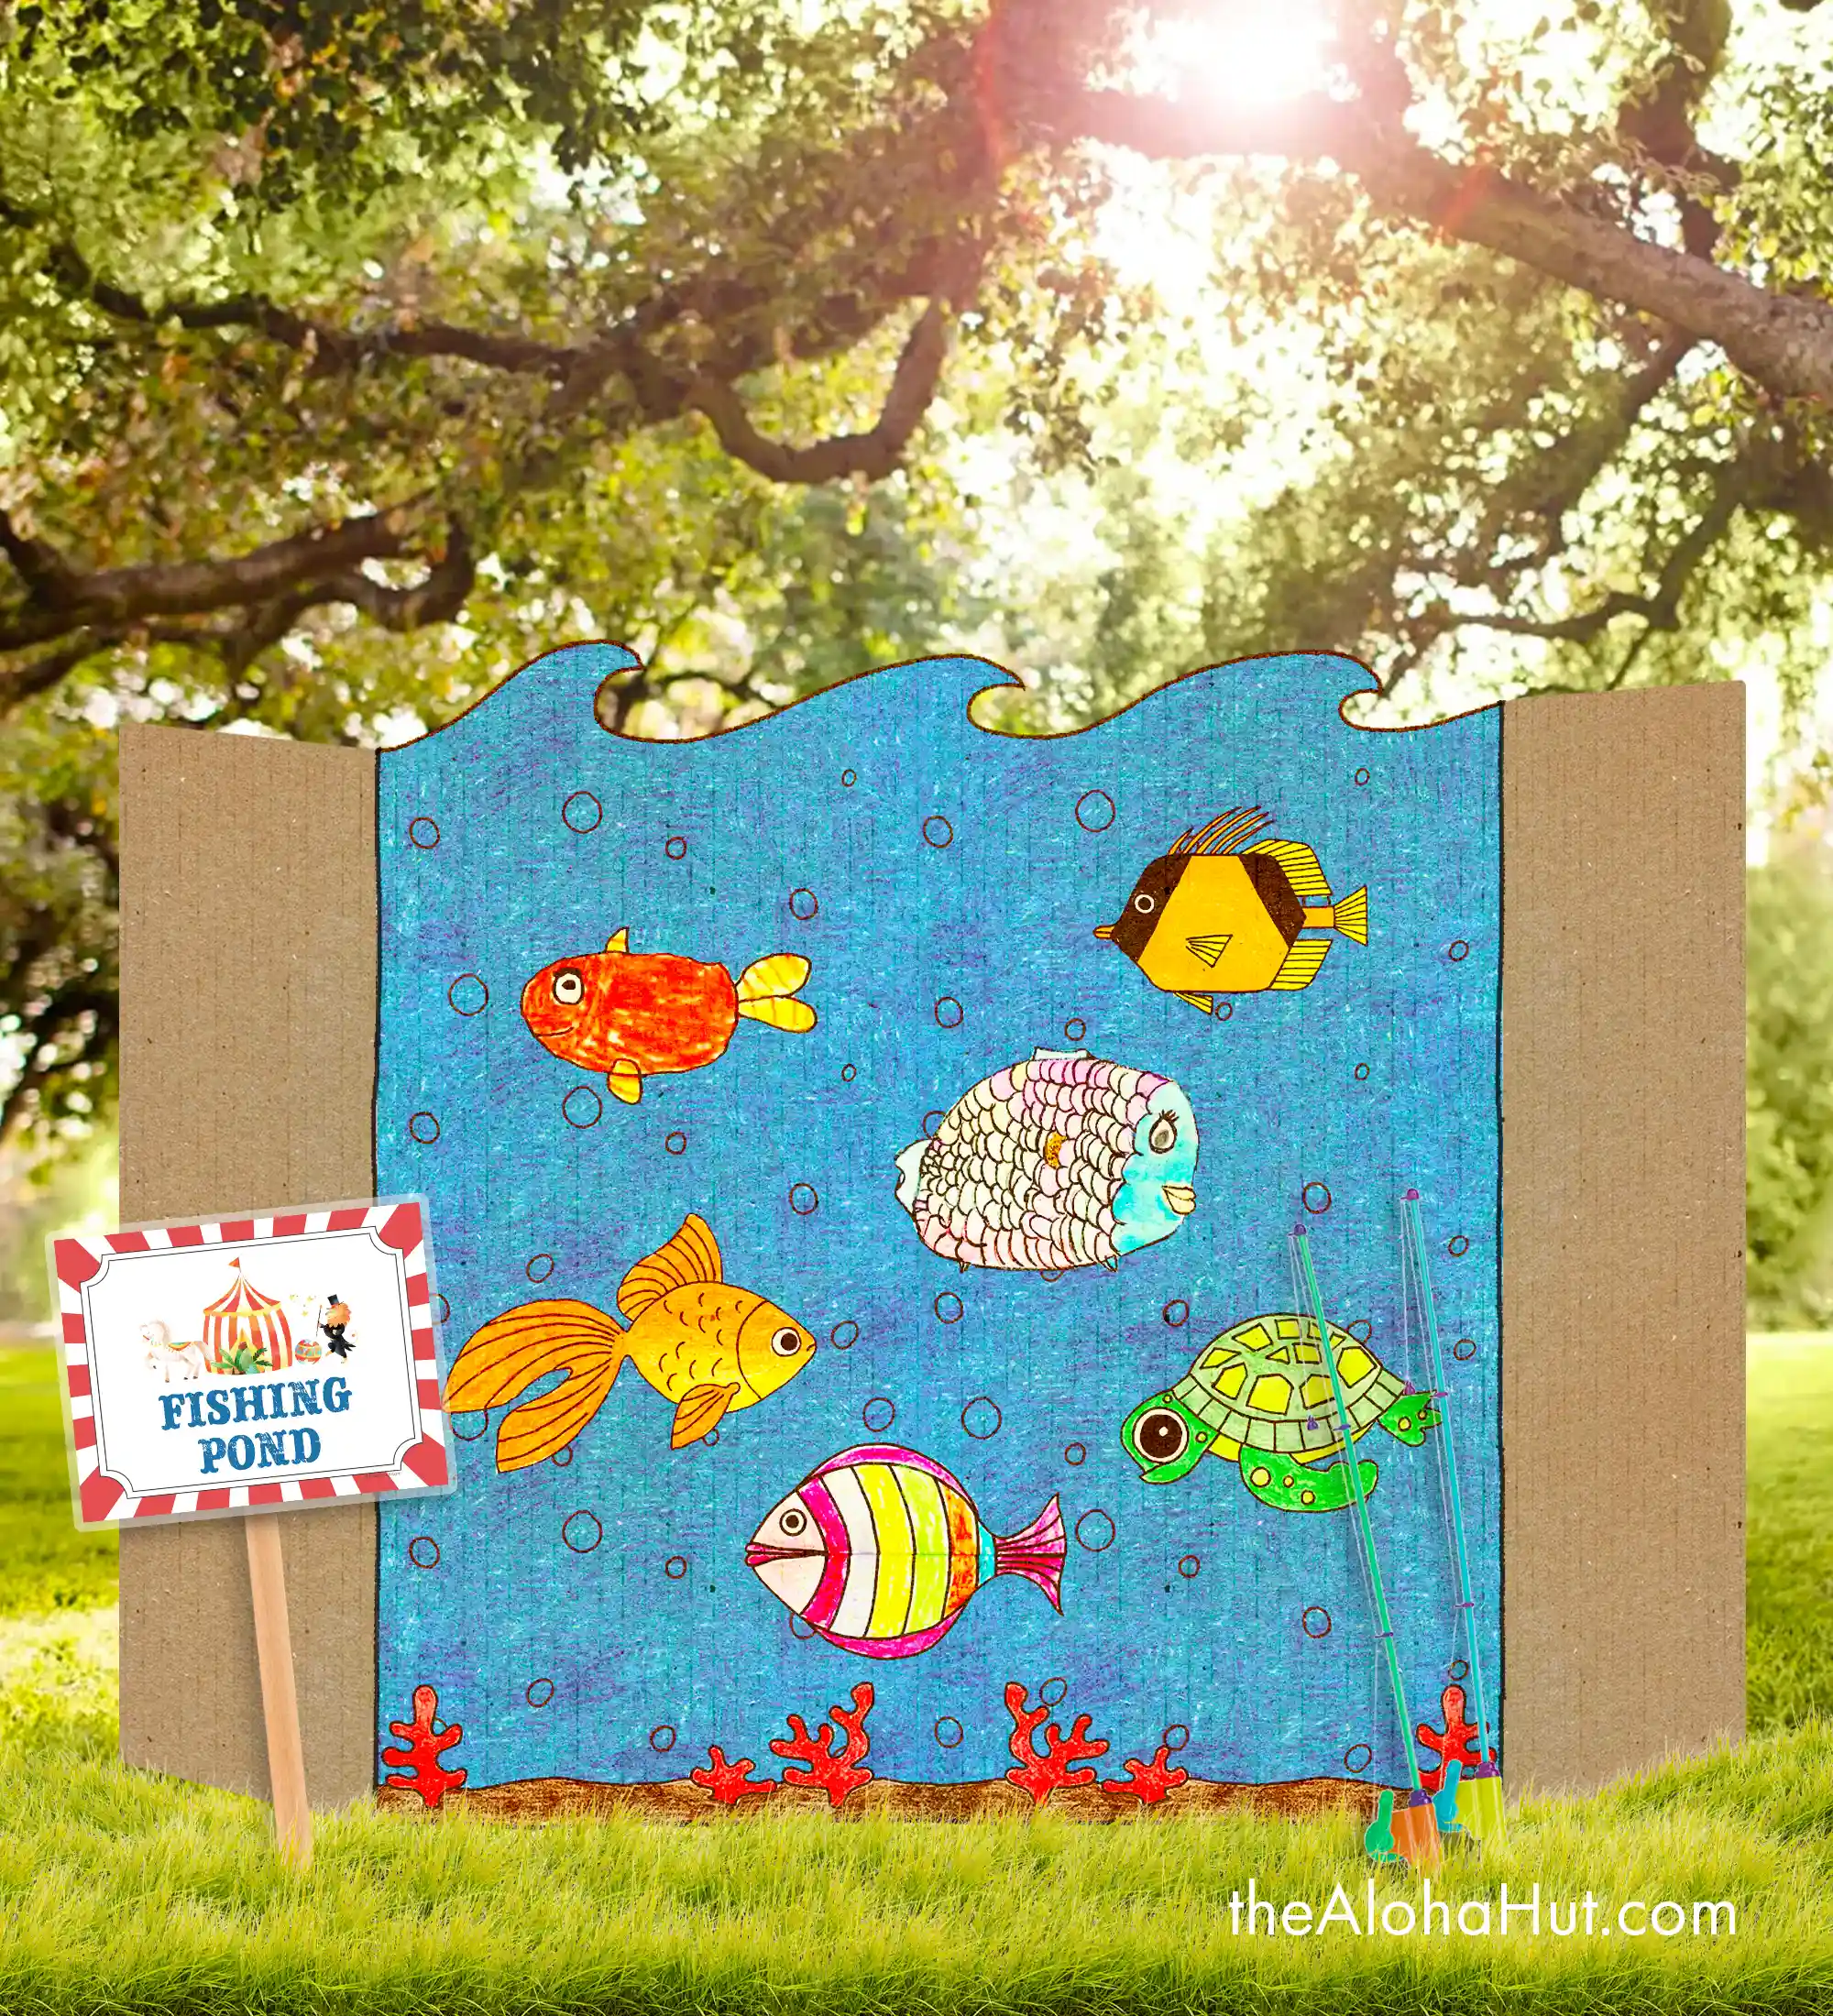 Carnival Party Ideas - Carnival Games - Fish Pond